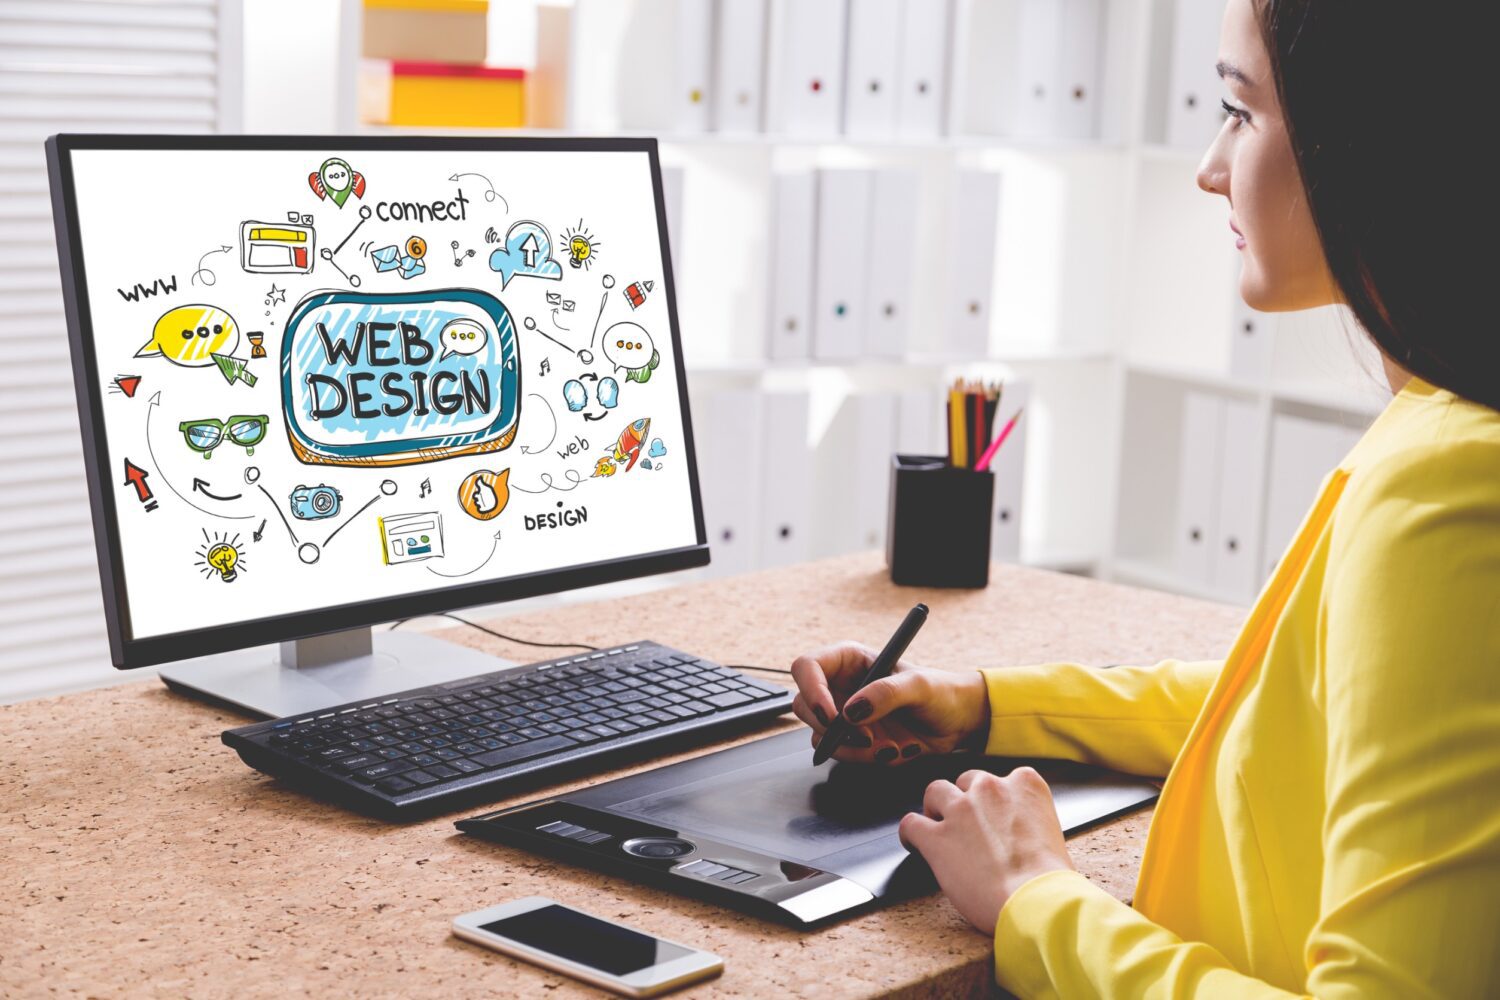 A young woman in a yellow shirt draws a colorful web design sketch on her desktop computer.